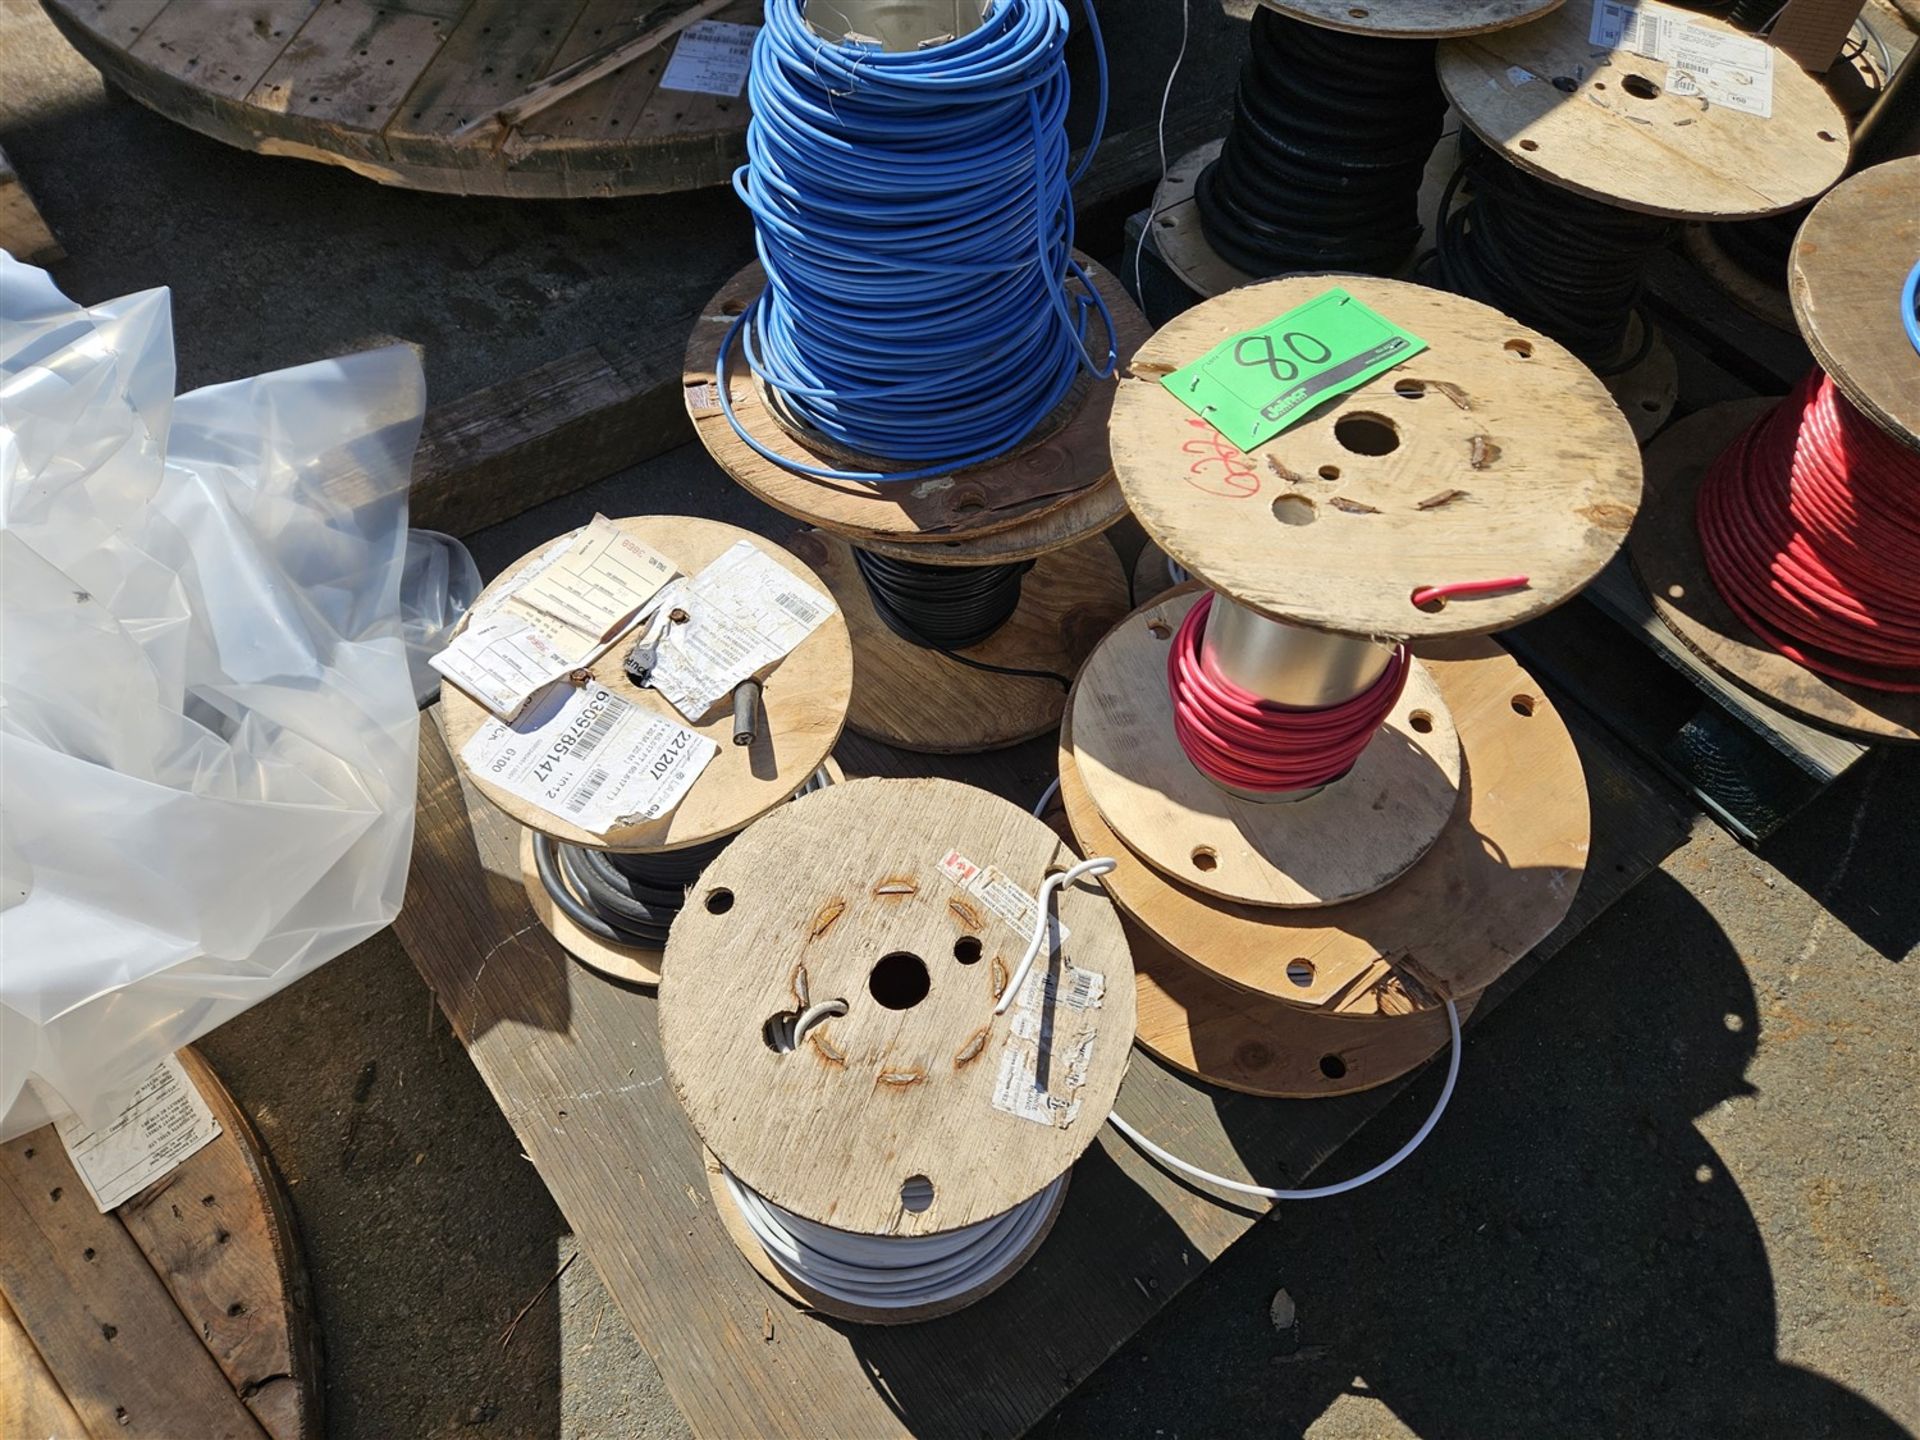 PALLET OF 7 REELS OF ASSORTED ELECTRICAL WIRE - COPPER